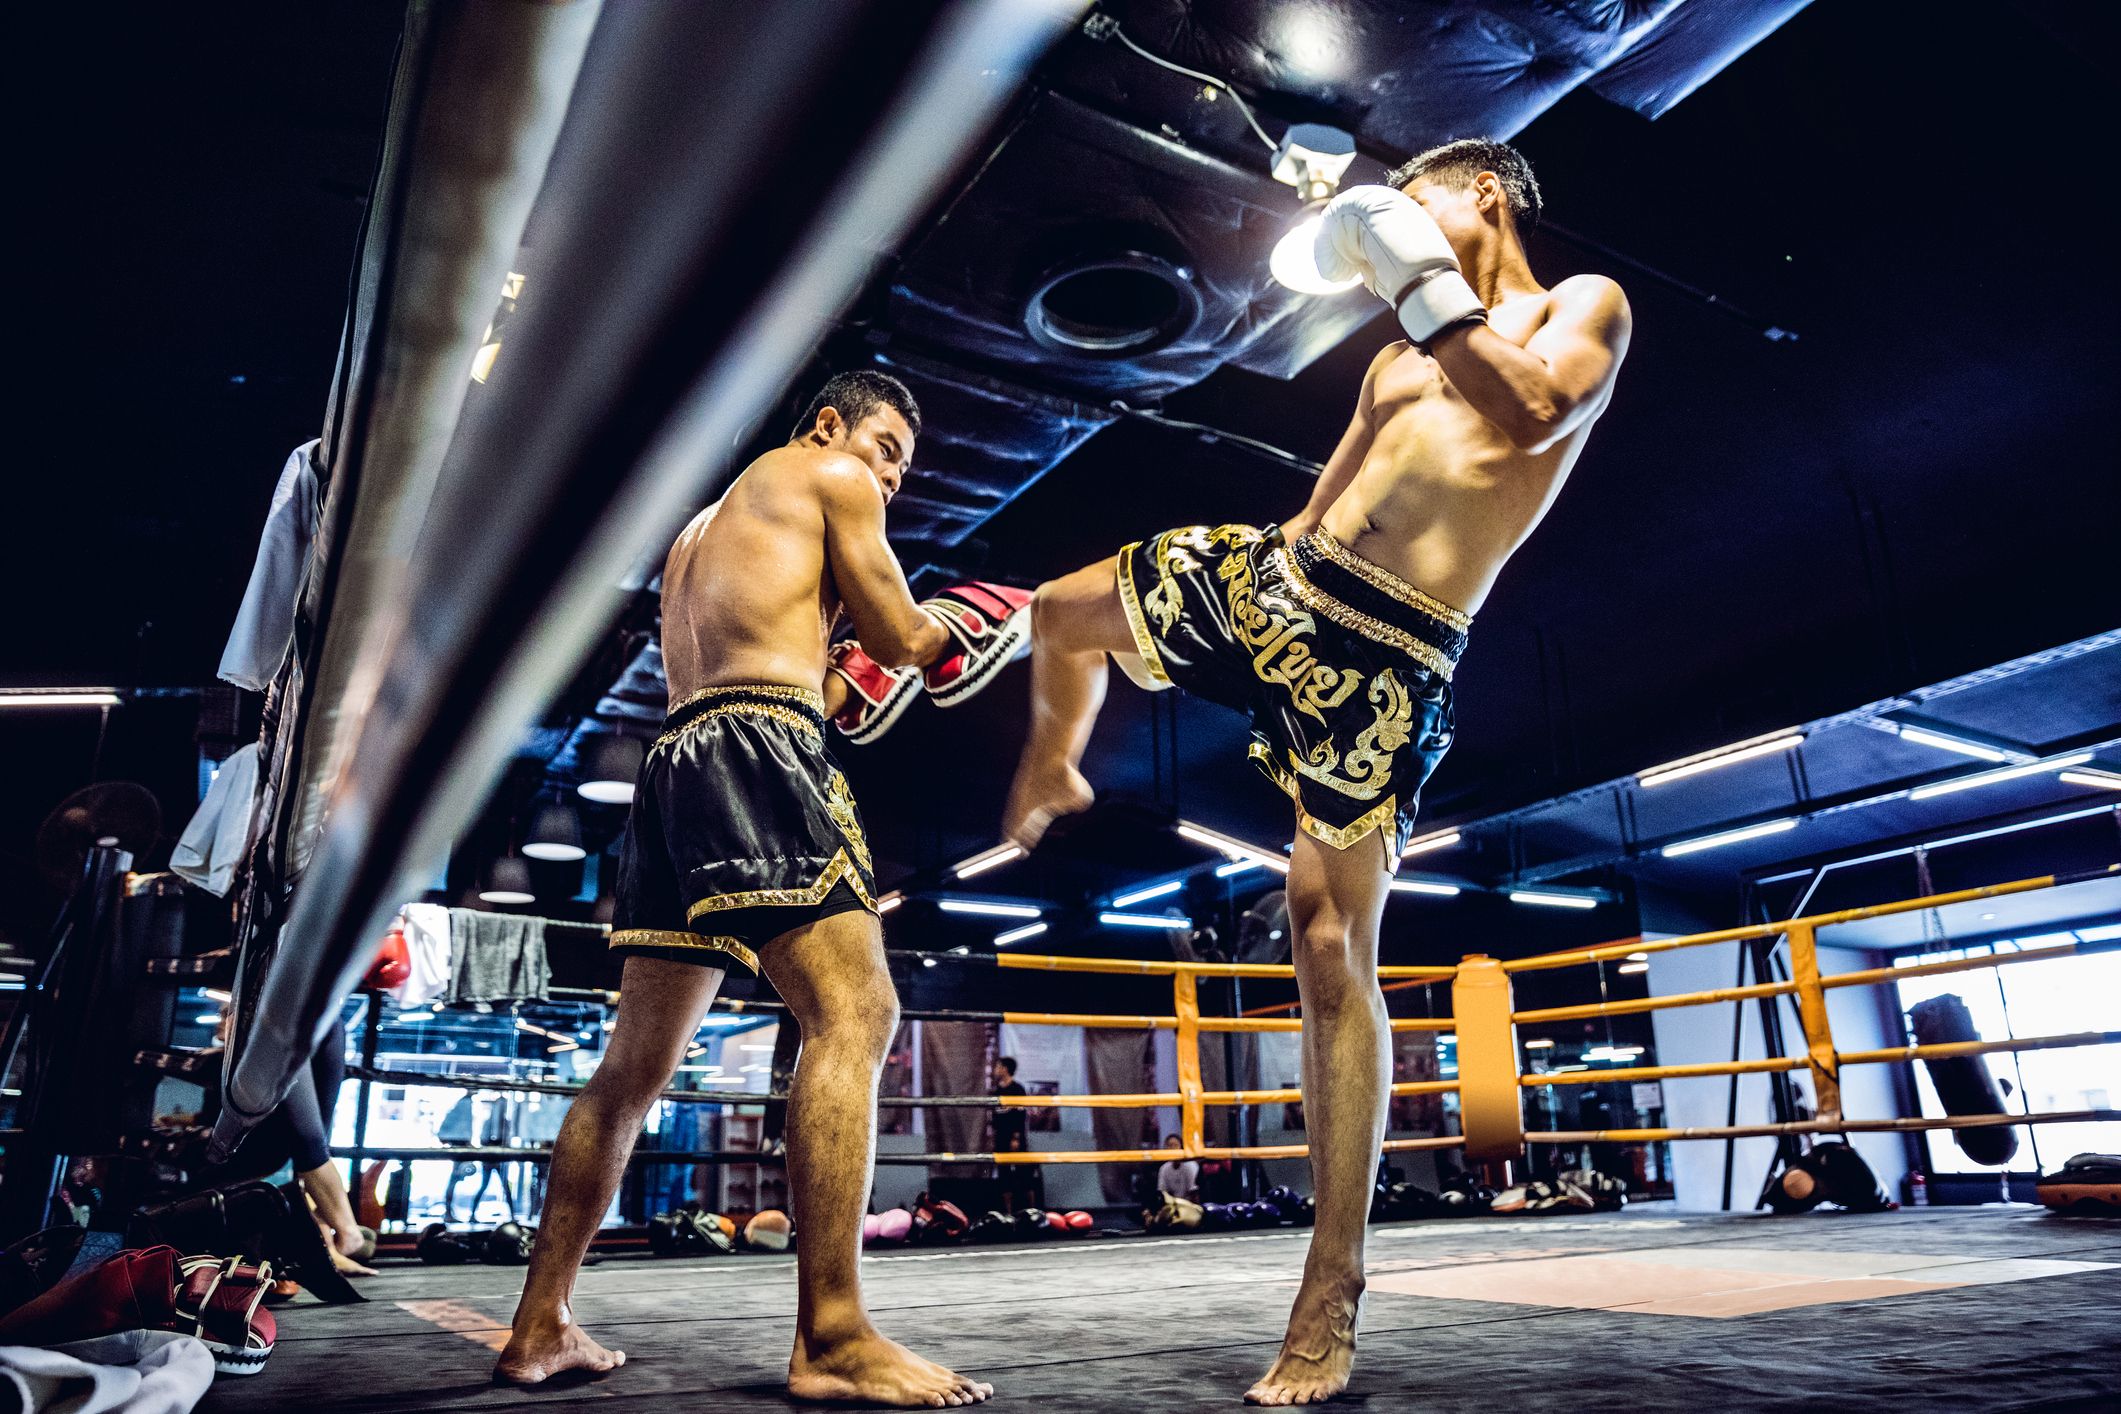 To fight like a champion you have to train like one. Muay Thai is